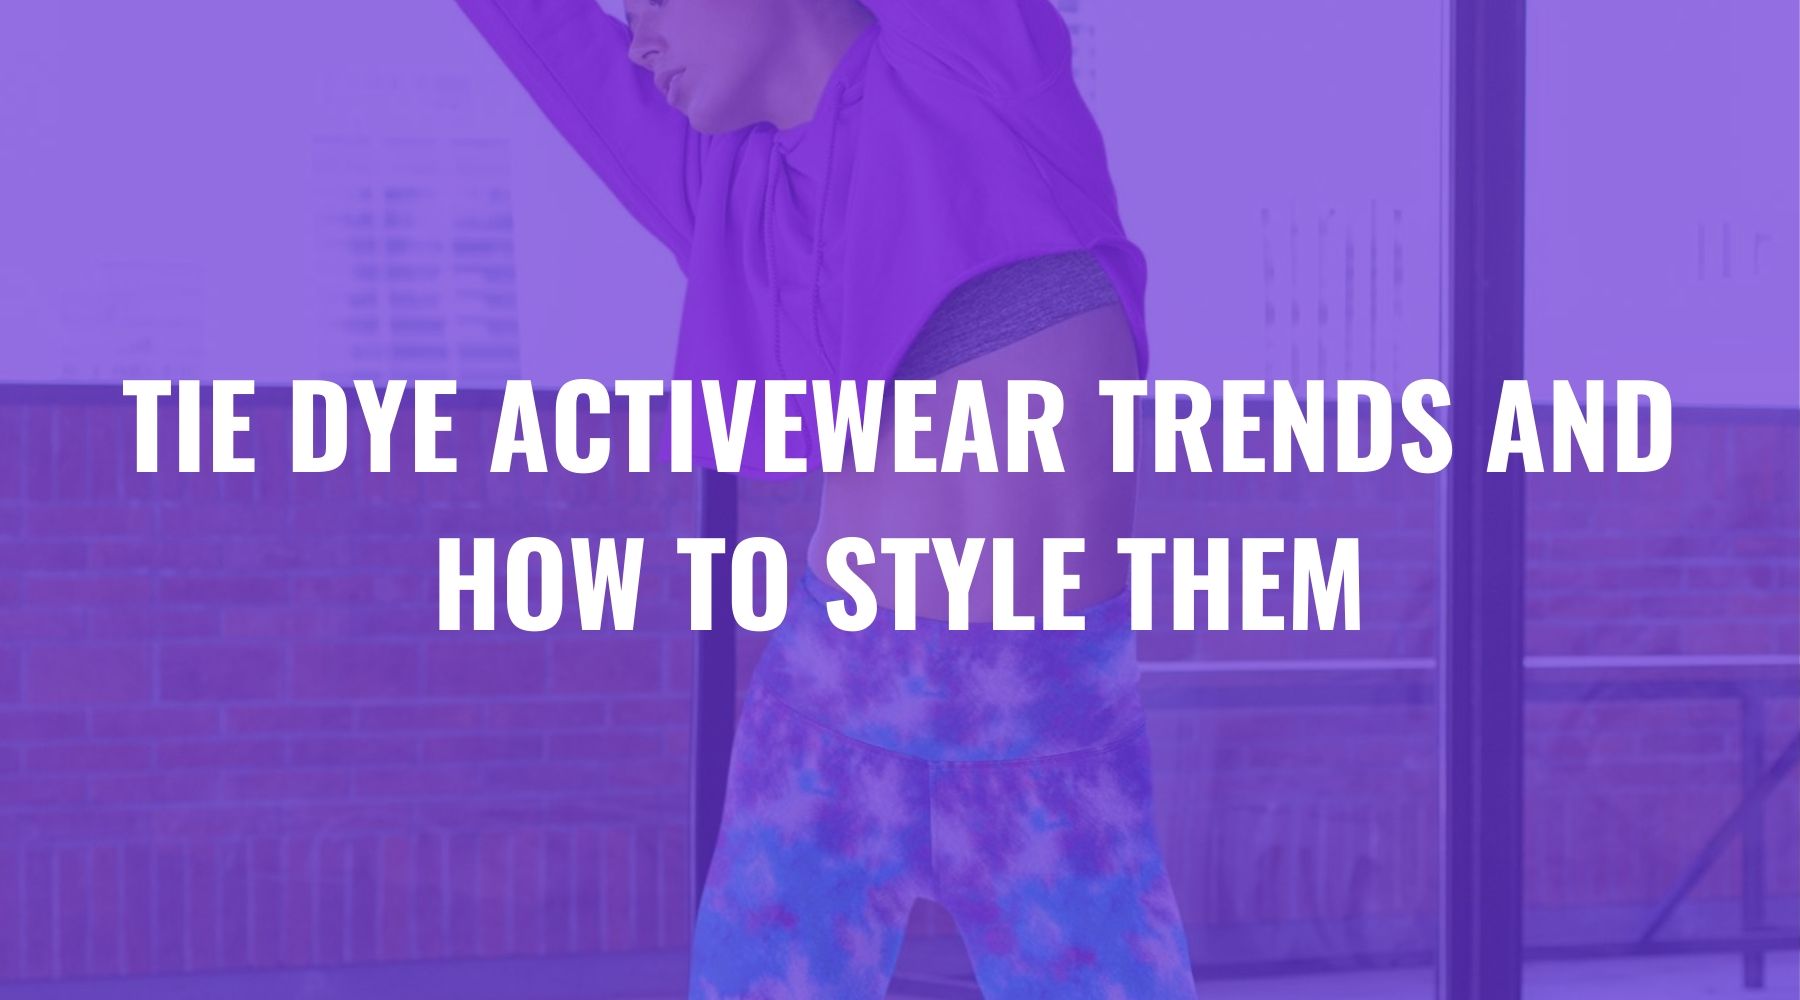 Tie Dye Activewear Trends and How to Style Them